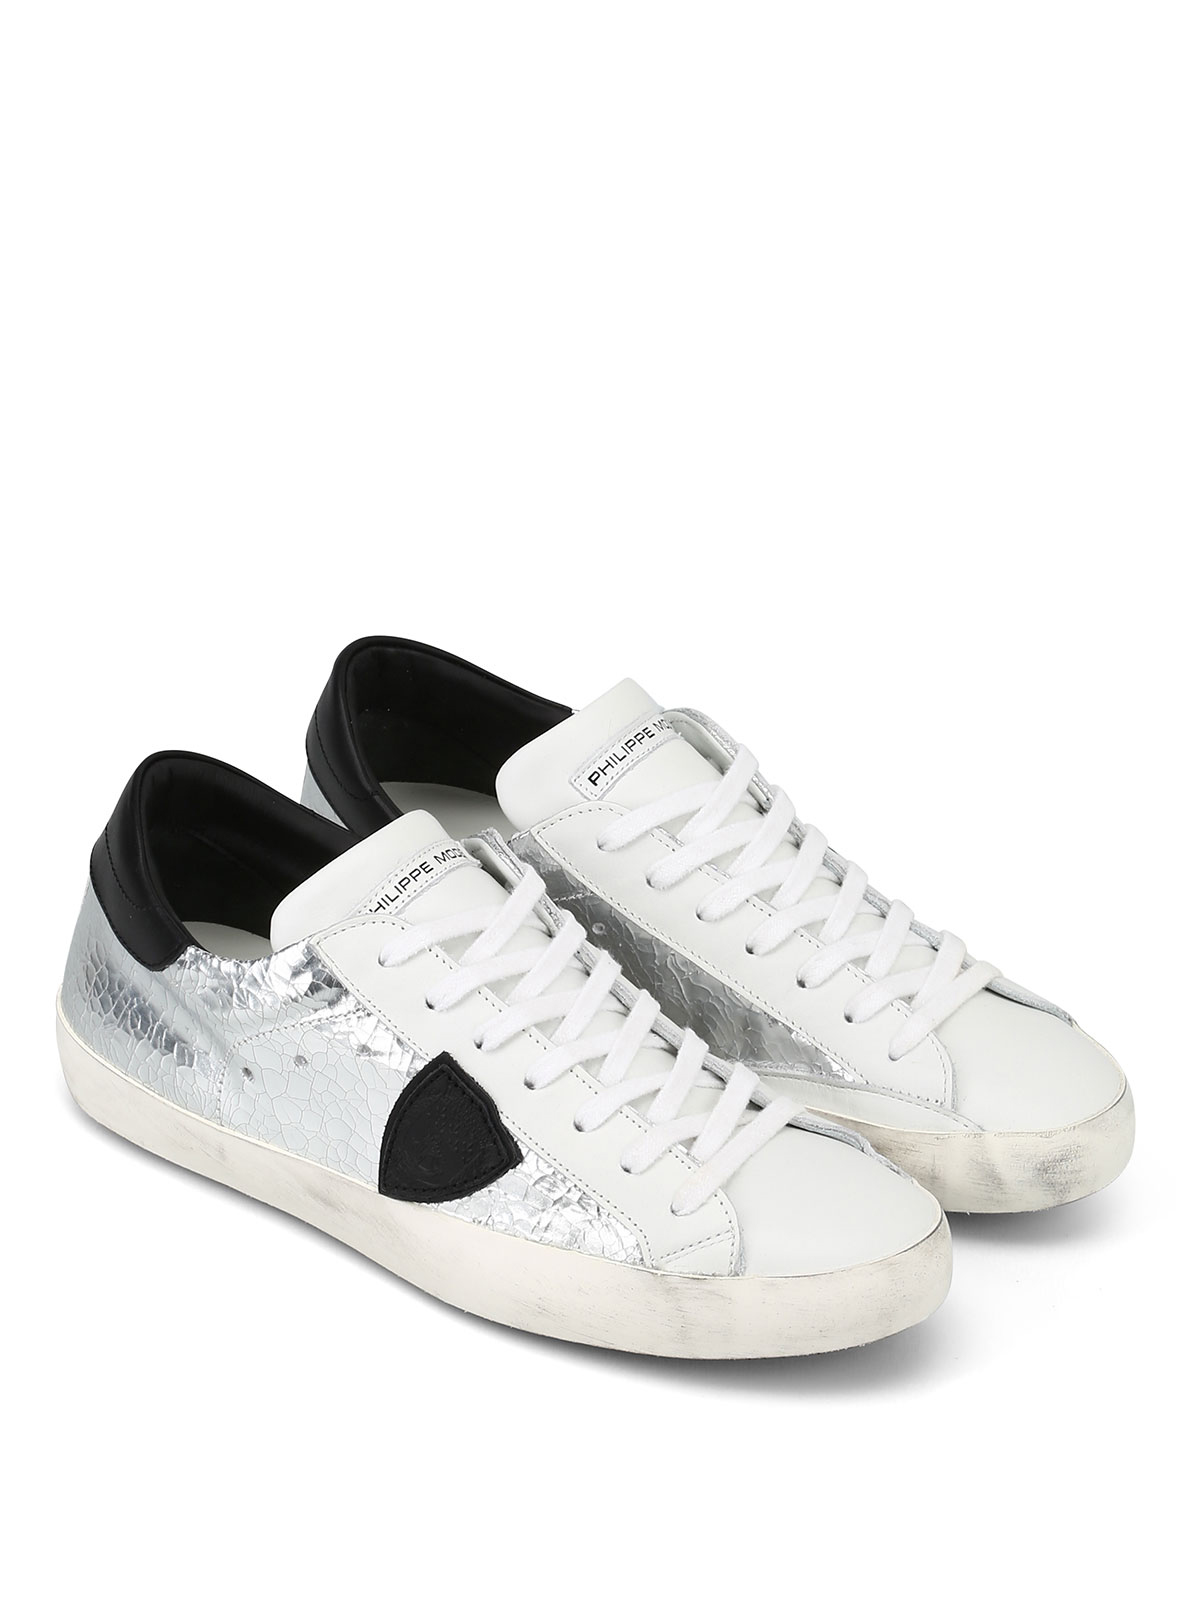 Trainers Philippe Model - Paris silver crackle leather sneakers 